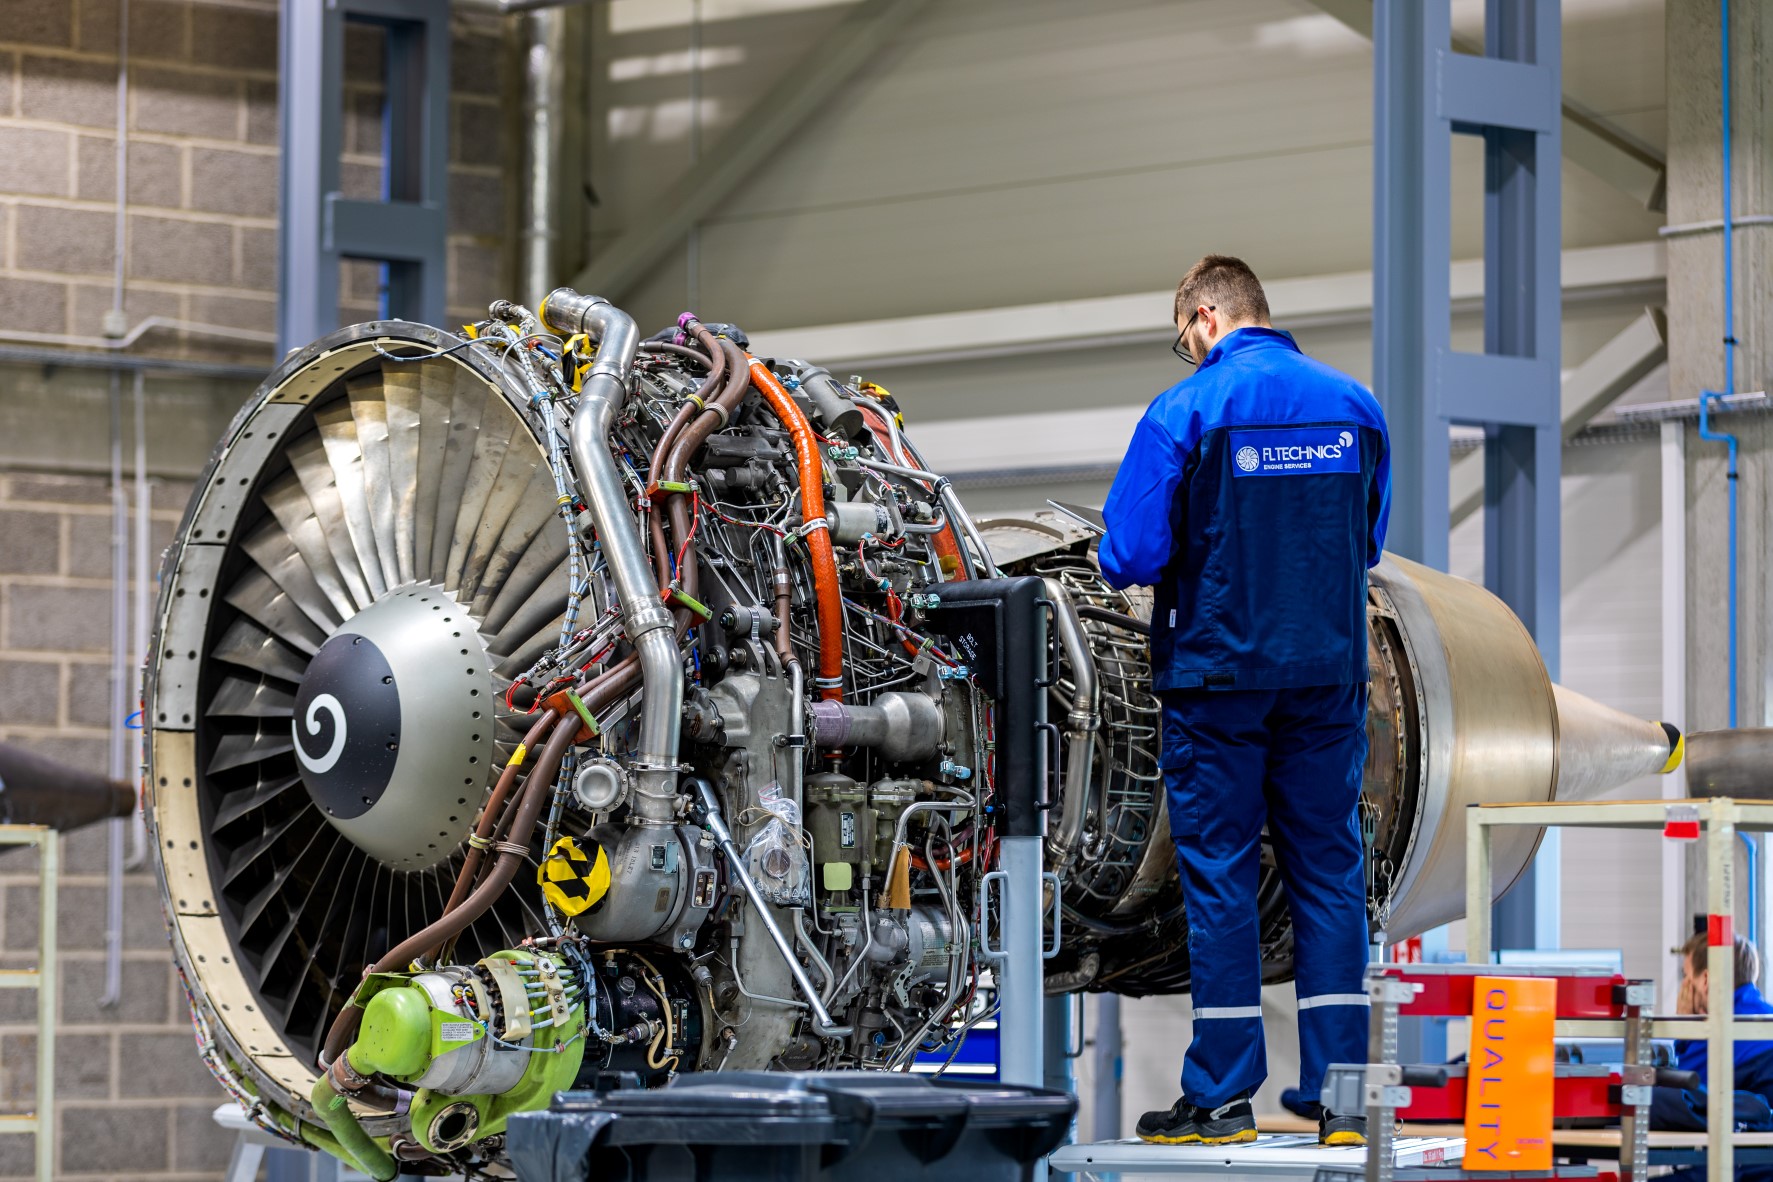 FL Technics Engine Services awarded ISO certification